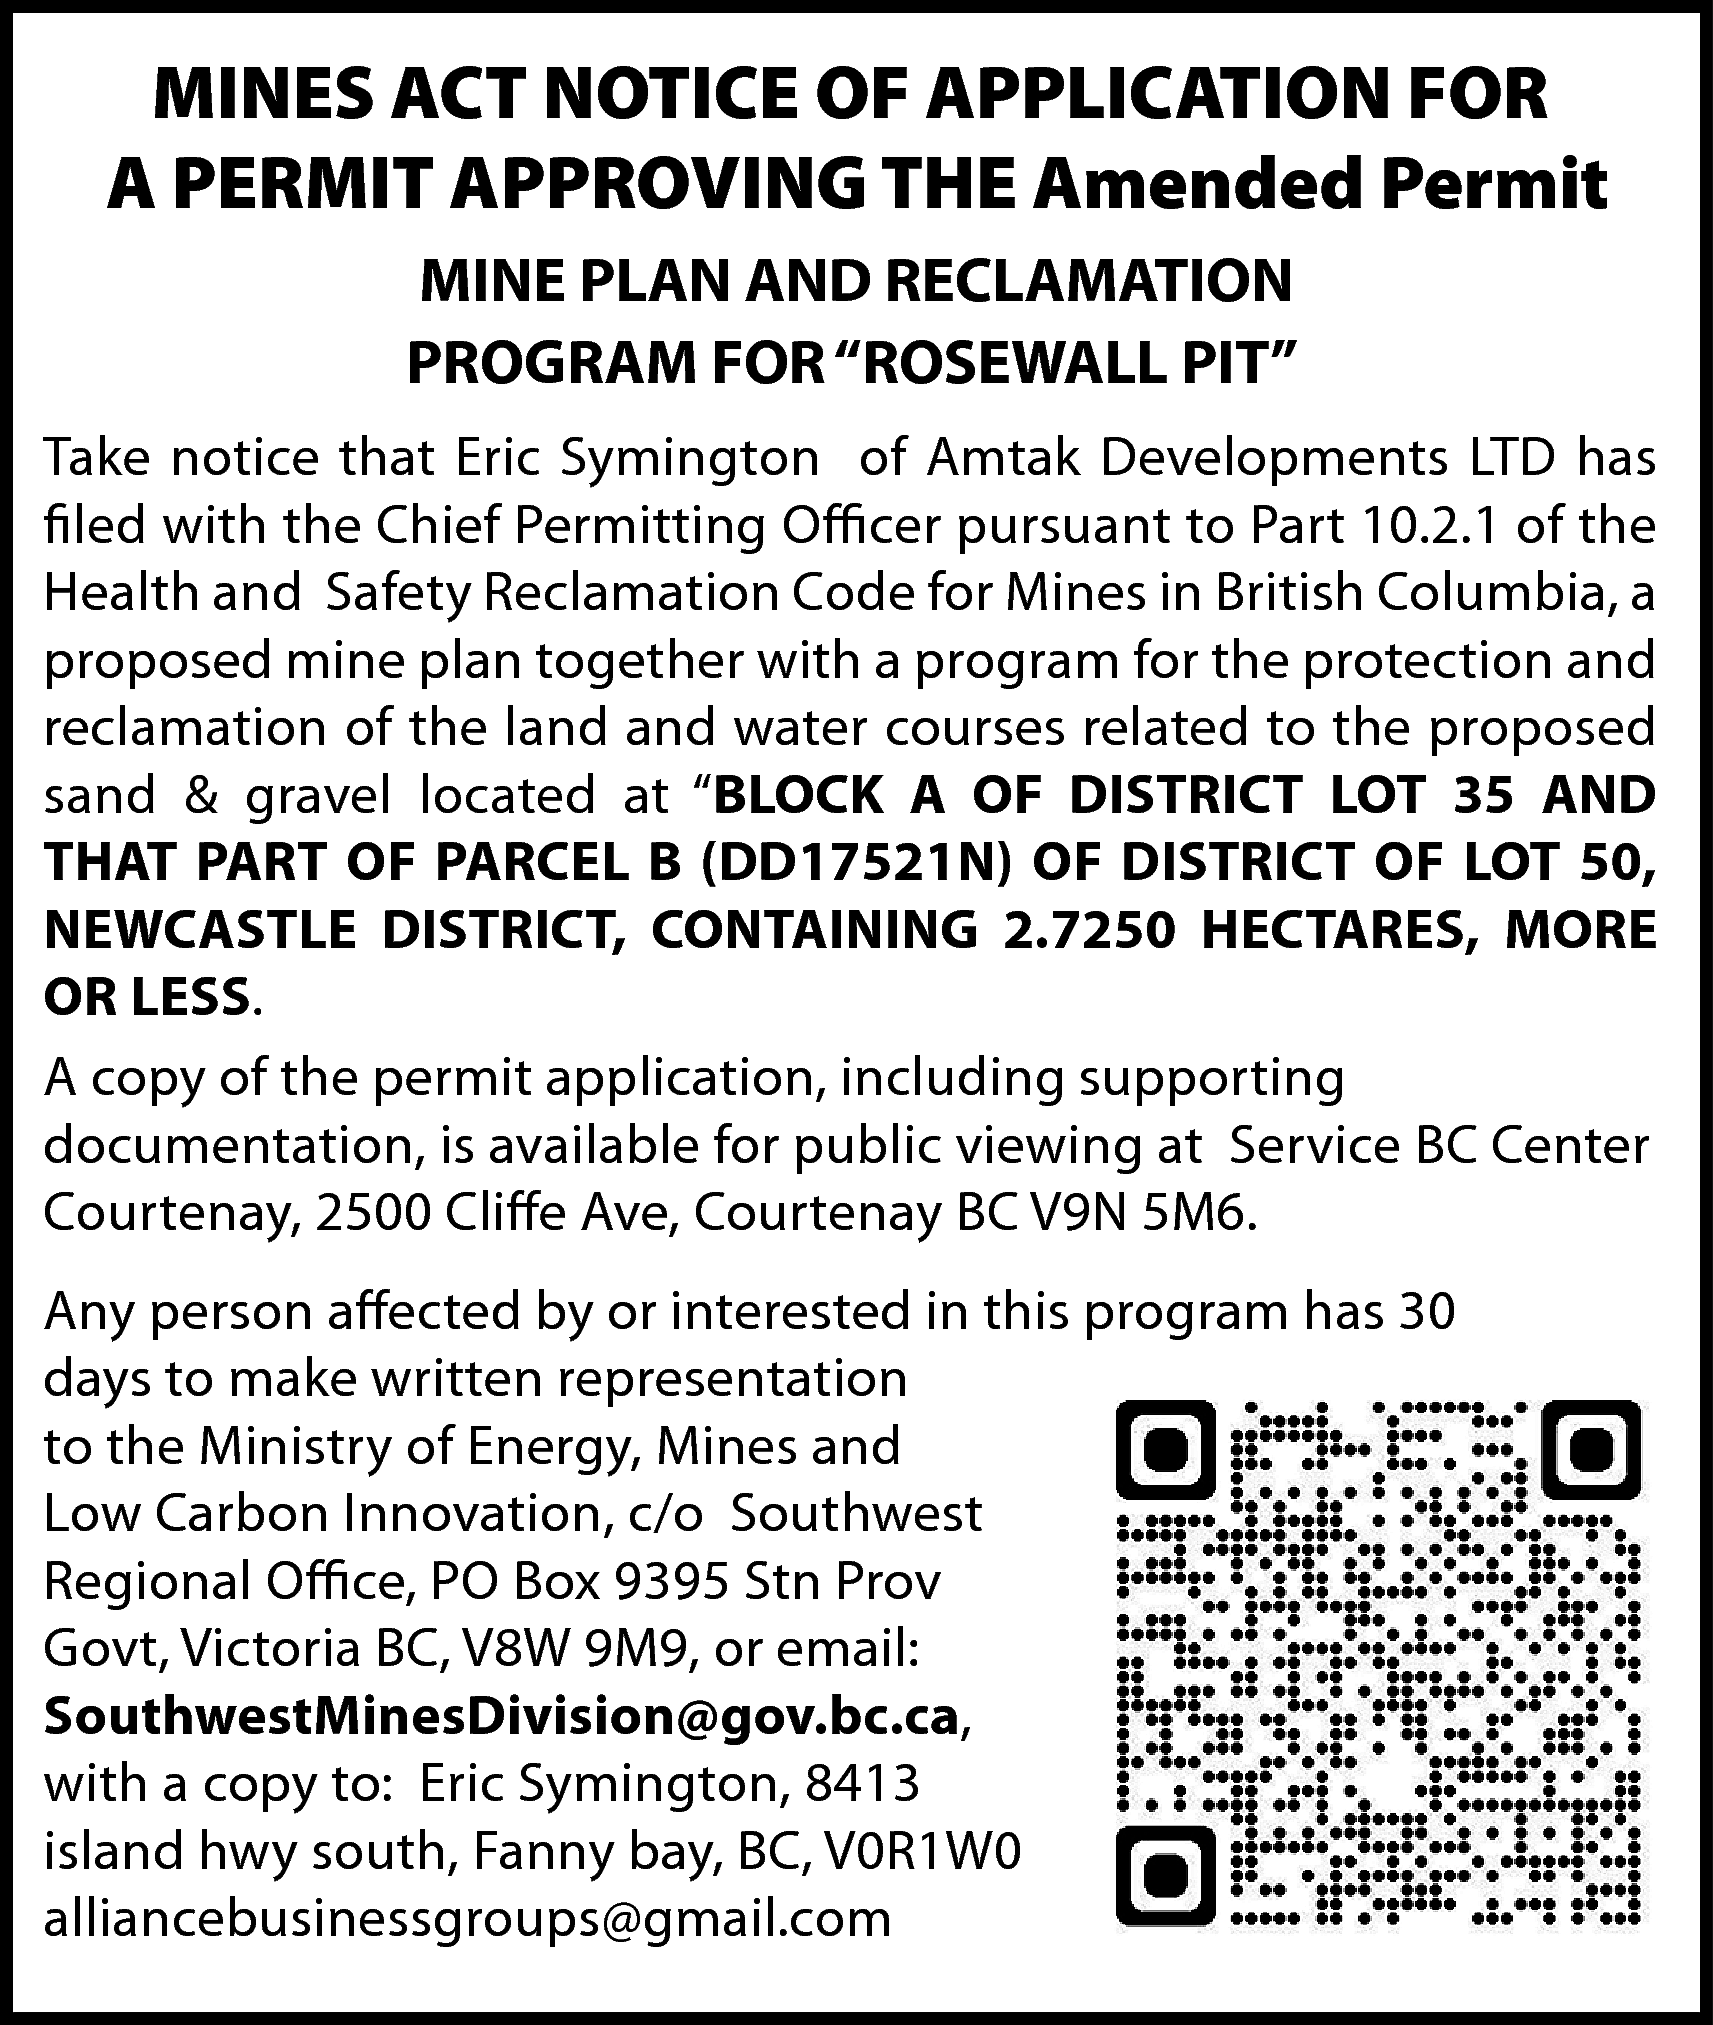 MINES ACT NOTICE OF APPLICATION  MINES ACT NOTICE OF APPLICATION FOR  A PERMIT APPROVING THE Amended Permit  MINE PLAN AND RECLAMATION  PROGRAM FOR “ROSEWALL PIT”  Take notice that Eric Symington of Amtak Developments LTD has  filed with the Chief Permitting Officer pursuant to Part 10.2.1 of the  Health and Safety Reclamation Code for Mines in British Columbia, a  proposed mine plan together with a program for the protection and  reclamation of the land and water courses related to the proposed  sand & gravel located at “BLOCK A OF DISTRICT LOT 35 AND  THAT PART OF PARCEL B (DD17521N) OF DISTRICT OF LOT 50,  NEWCASTLE DISTRICT, CONTAINING 2.7250 HECTARES, MORE  OR LESS.  A copy of the permit application, including supporting  documentation, is available for public viewing at Service BC Center  Courtenay, 2500 Cliffe Ave, Courtenay BC V9N 5M6.  Any person affected by or interested in this program has 30  days to make written representation  to the Ministry of Energy, Mines and  Low Carbon Innovation, c/o Southwest  Regional Office, PO Box 9395 Stn Prov  Govt, Victoria BC, V8W 9M9, or email:  SouthwestMinesDivision@gov.bc.ca,  with a copy to: Eric Symington, 8413  island hwy south, Fanny bay, BC, V0R1W0  alliancebusinessgroups@gmail.com    